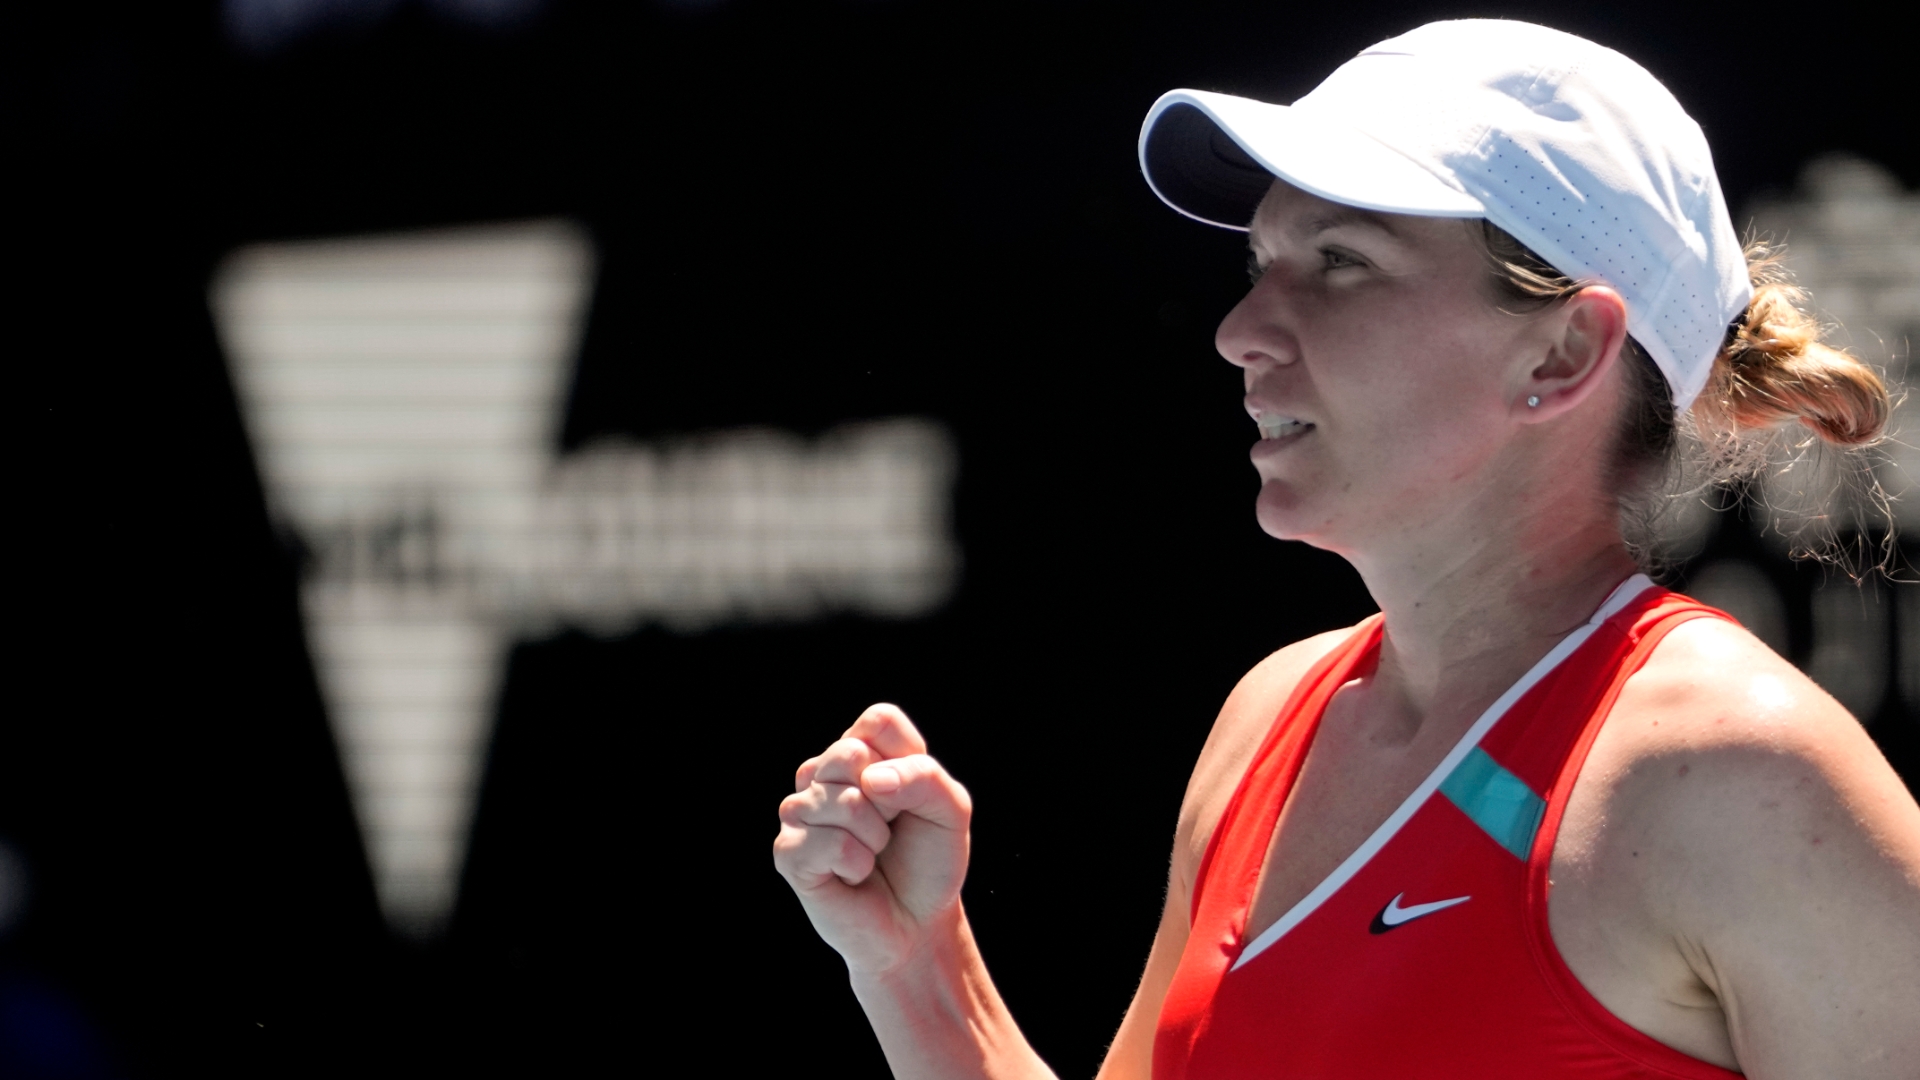 Halep advances to the fourth round in straight sets - Stream the Video